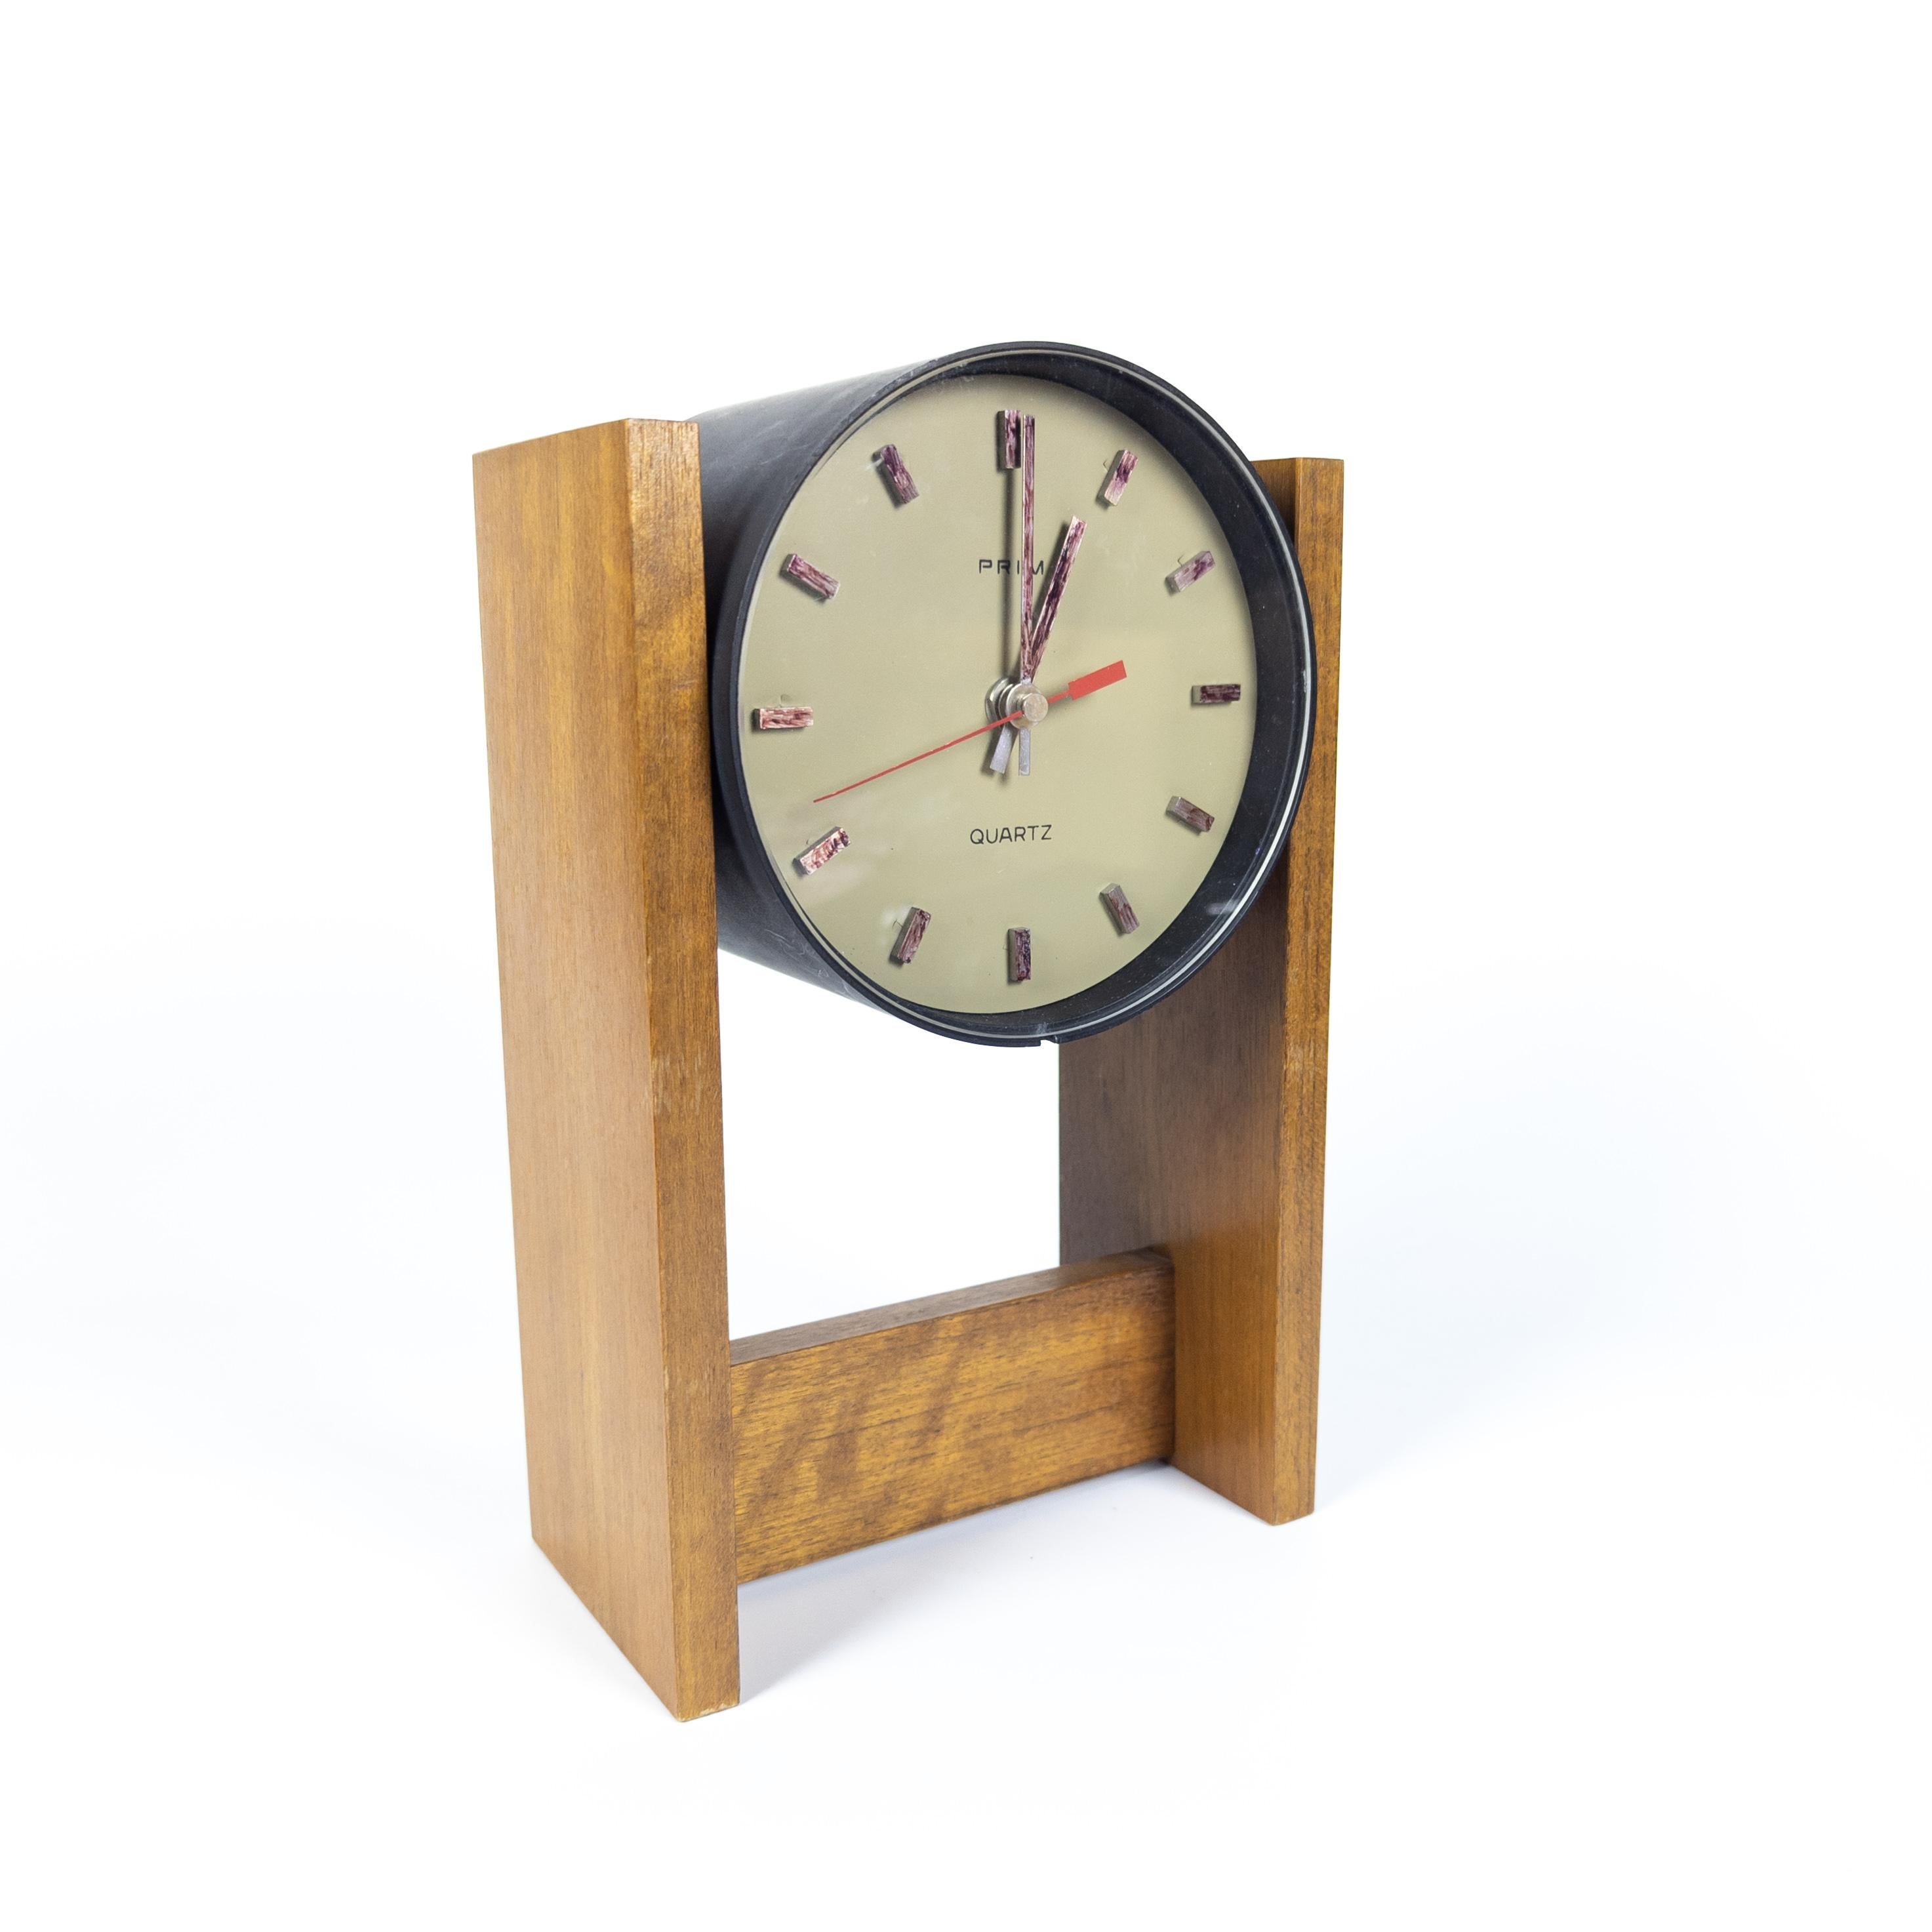 Arm watches and wall clocks Prim have made a name for themselves in the world. Round plastic clock with a simple dial and a red second hand are fitted in a wooden form which can be easily hanged or used as desk clock. The clock is fully functional